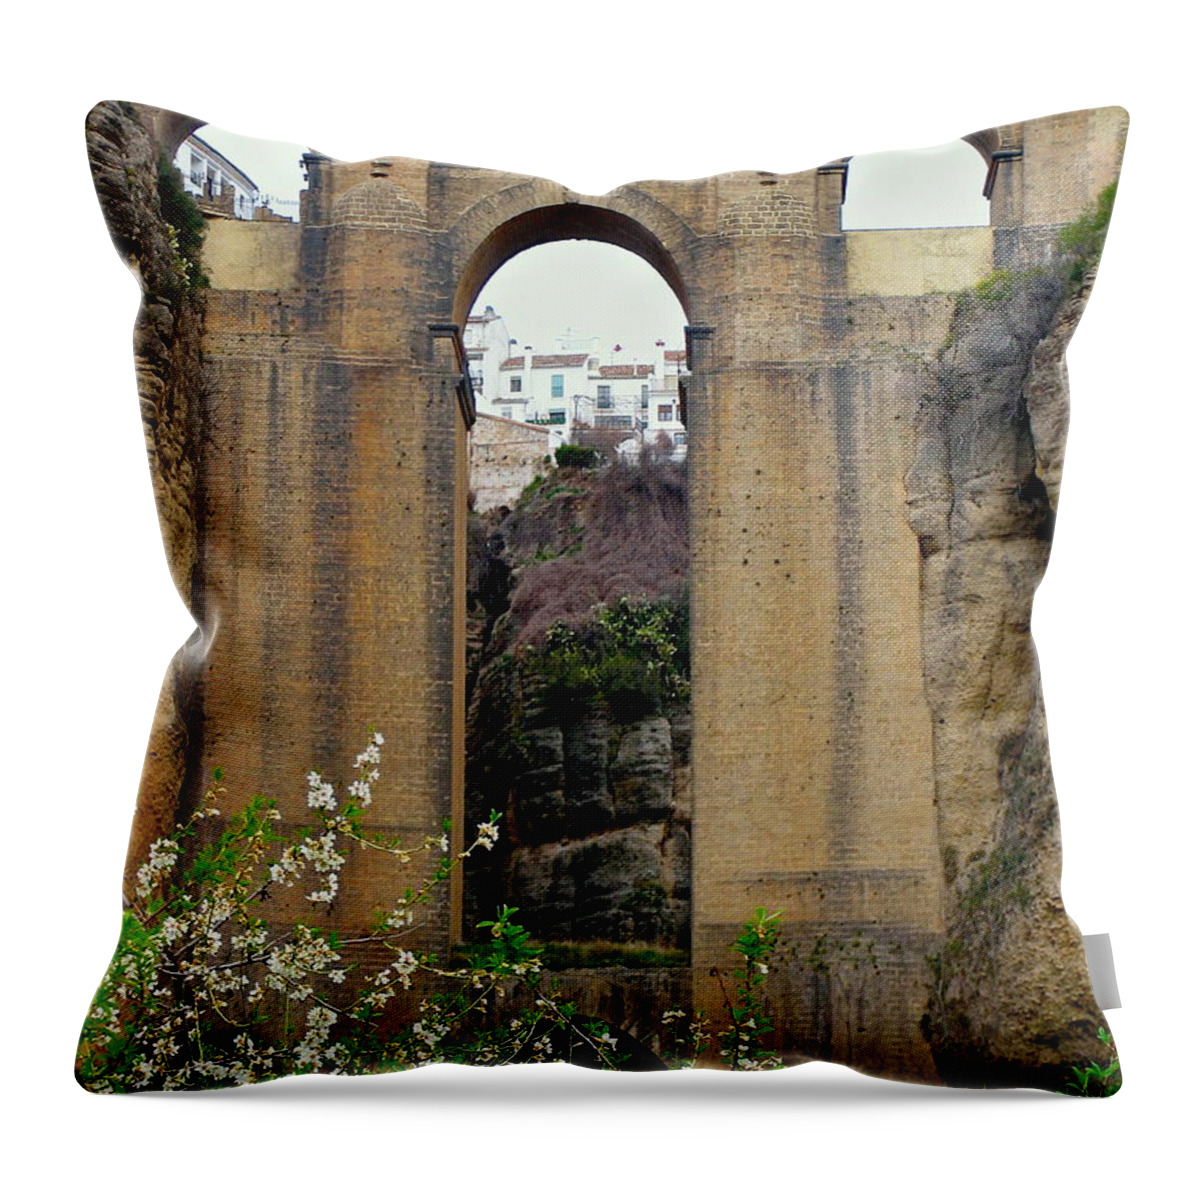 Ronda Throw Pillow featuring the photograph The New Bridge by Suzanne Oesterling